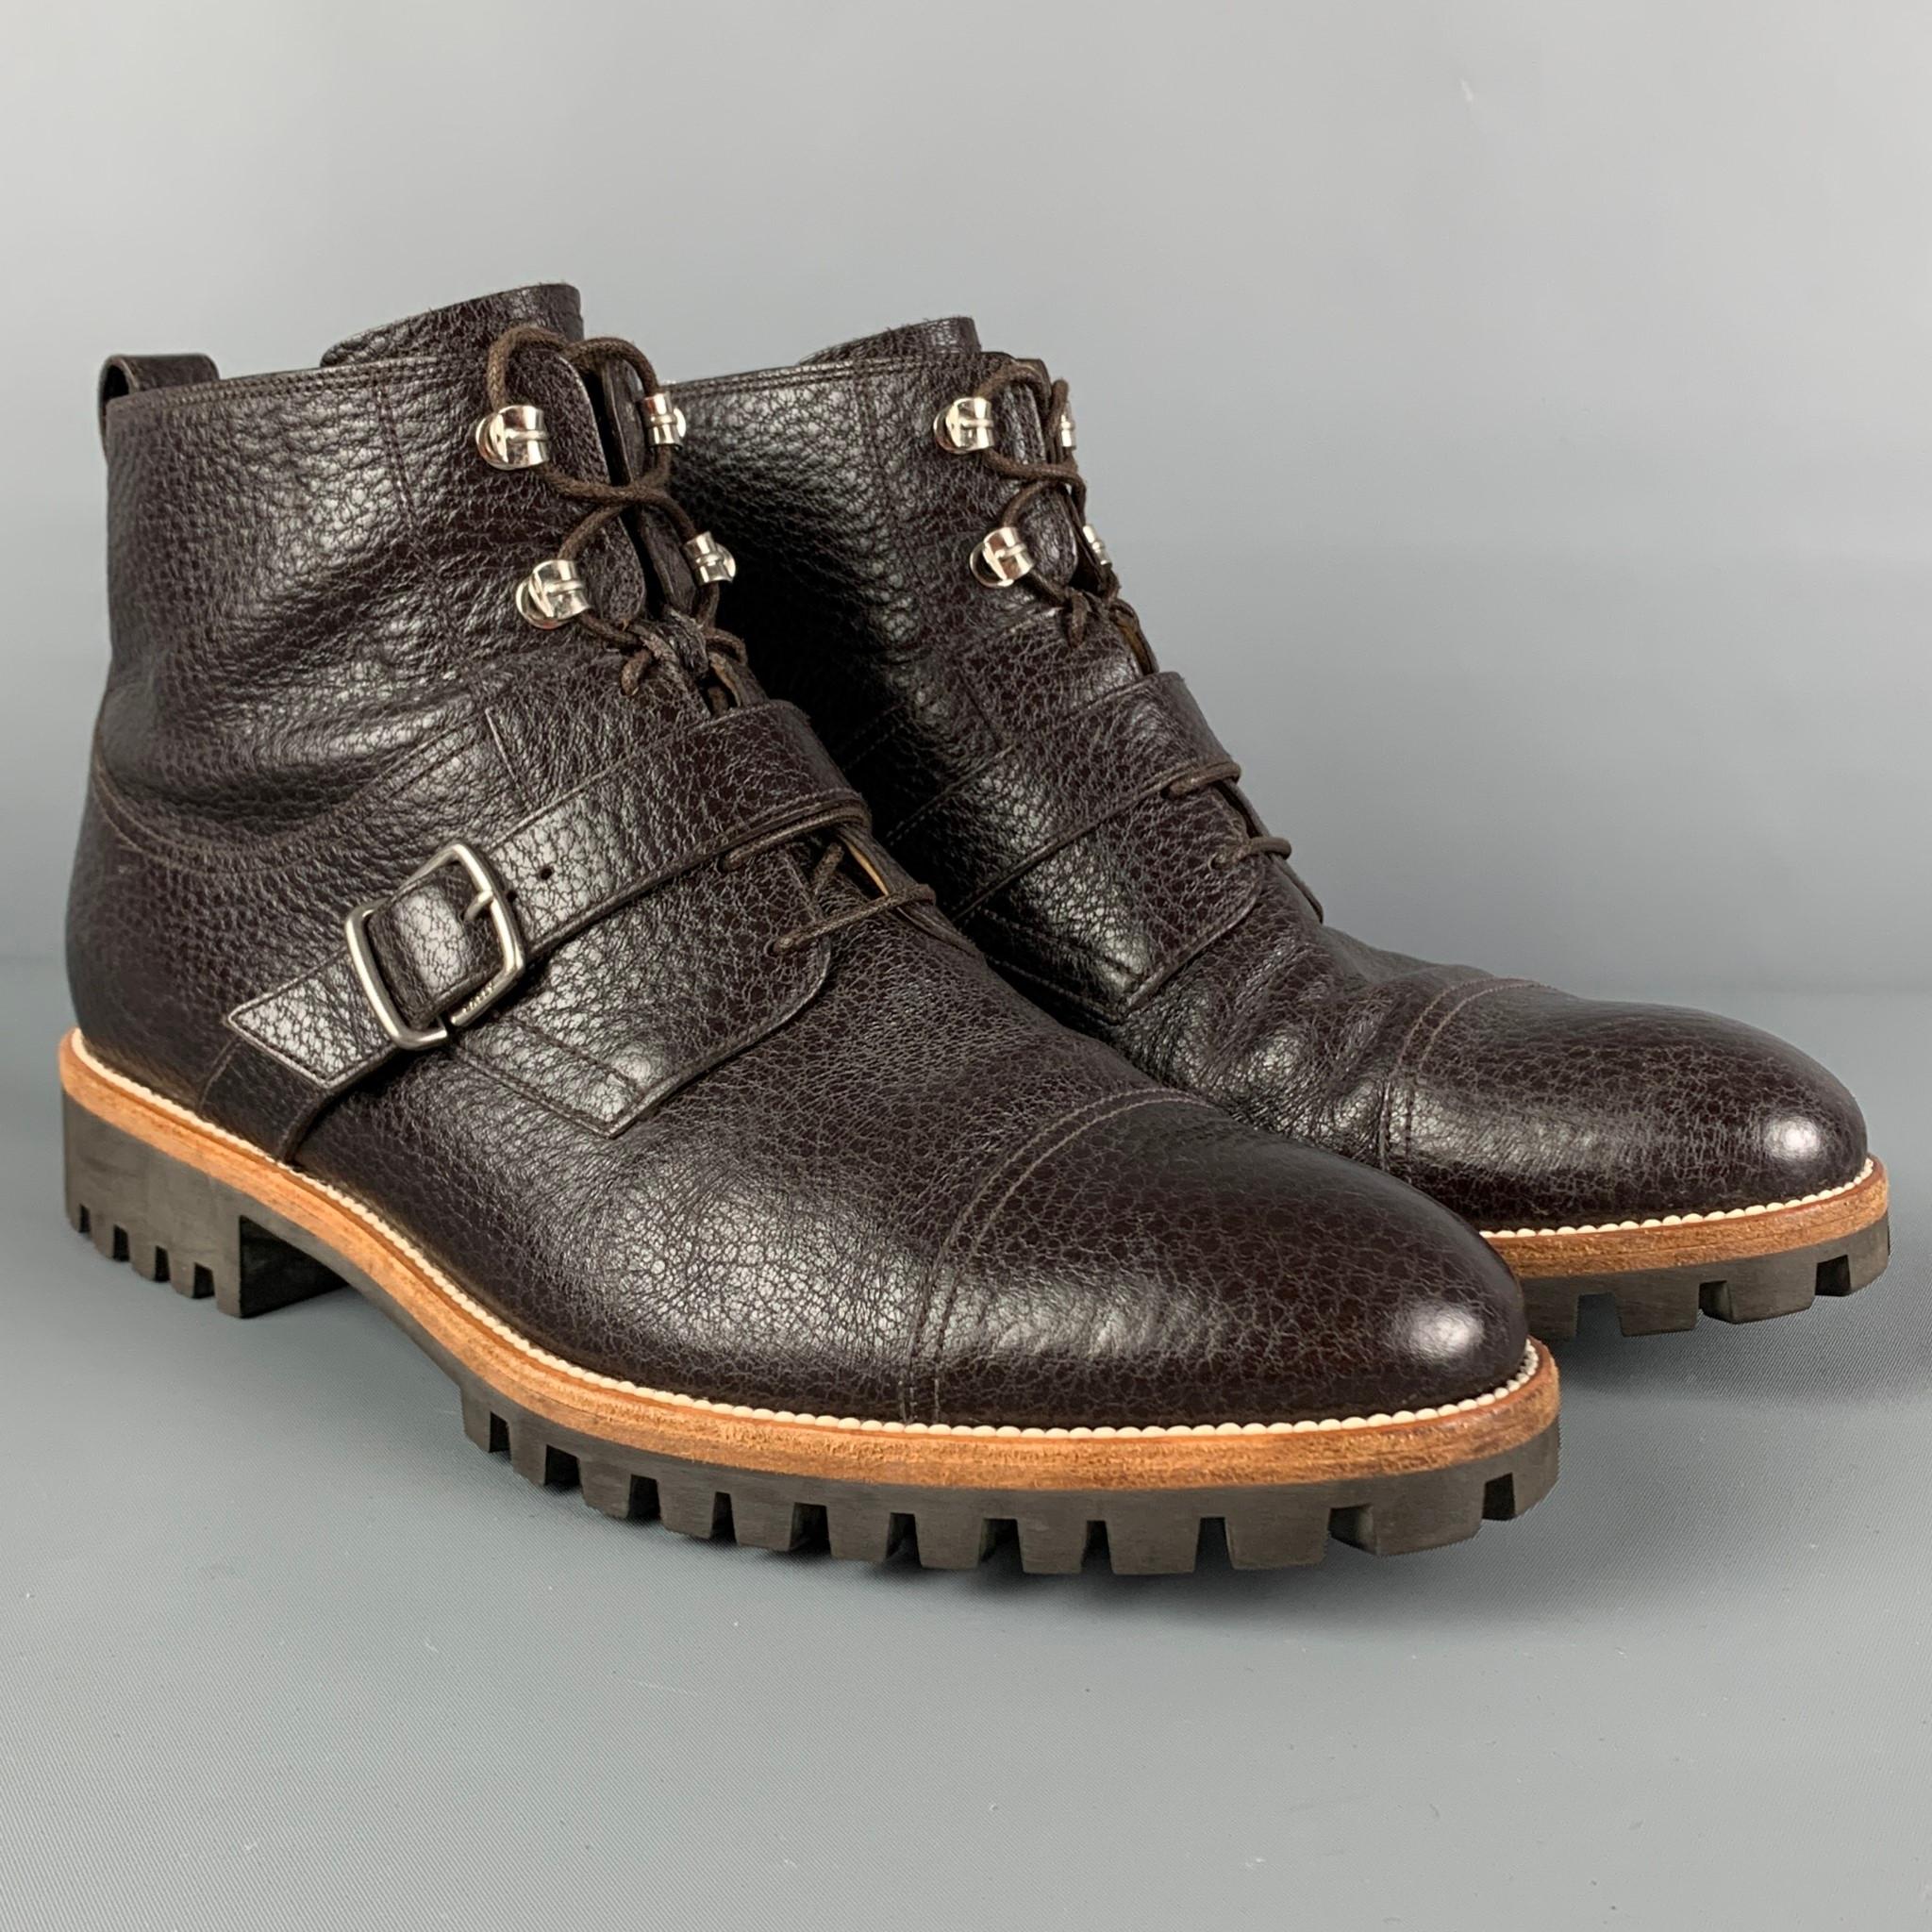 BALLY 'Powell' boots comes in a brown pebble grain leather featuring a cap toe, front strap detail, and a alce up closure. Made in Switzerland. 

Very Good Pre-Owned Condition.
Marked: EU 6.5 E / US 7.5 D

Measurements:

Length: 11.5 in.
Width: 4